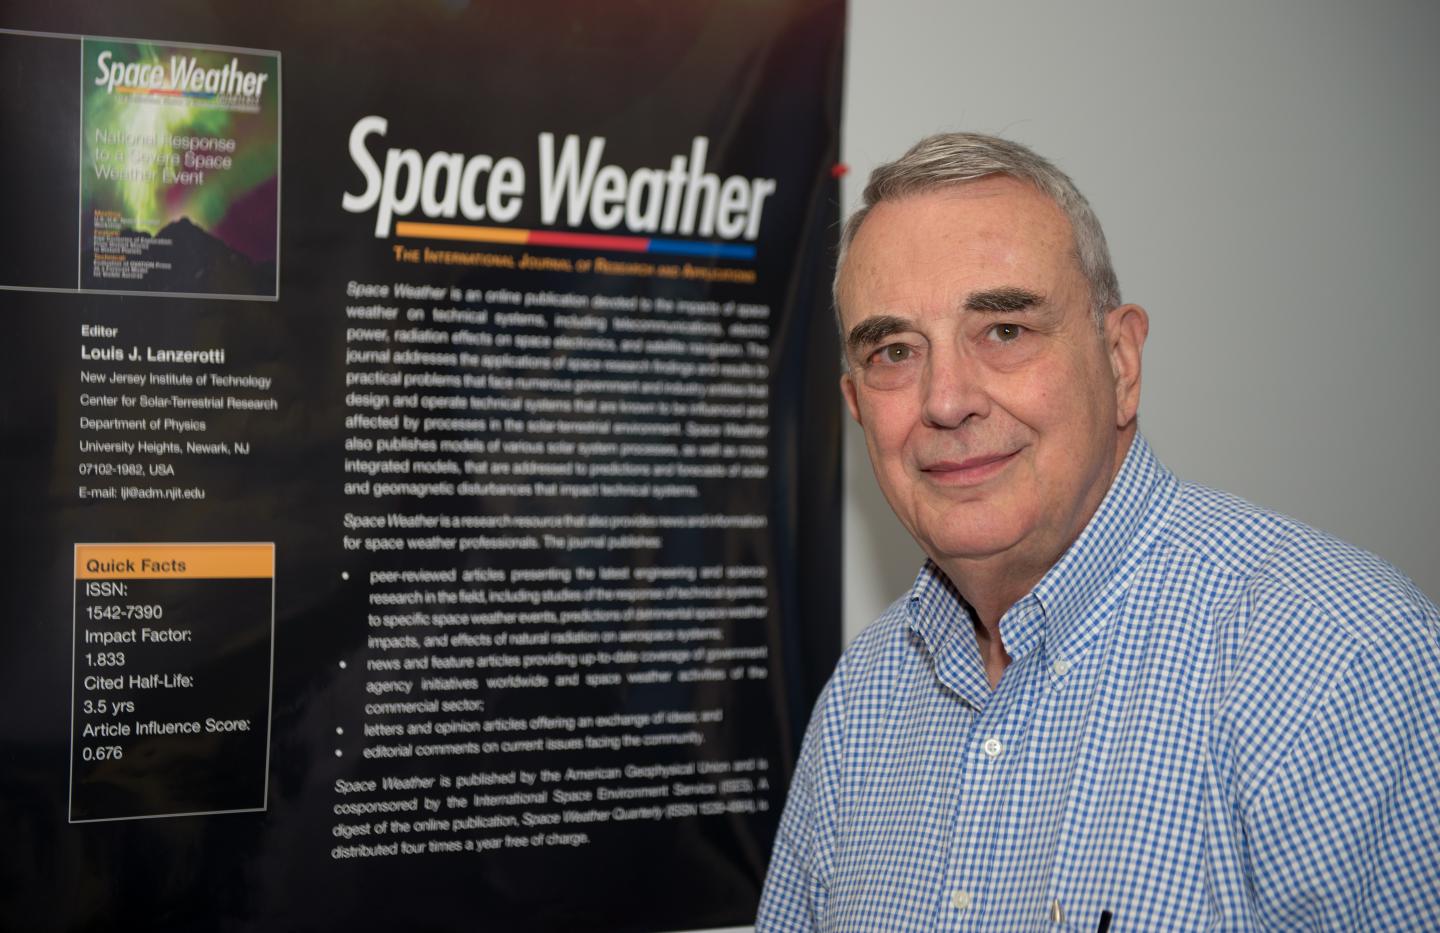 The AIAA Taps Space Weather Pioneer Louis Lanzerotti for a Career Award